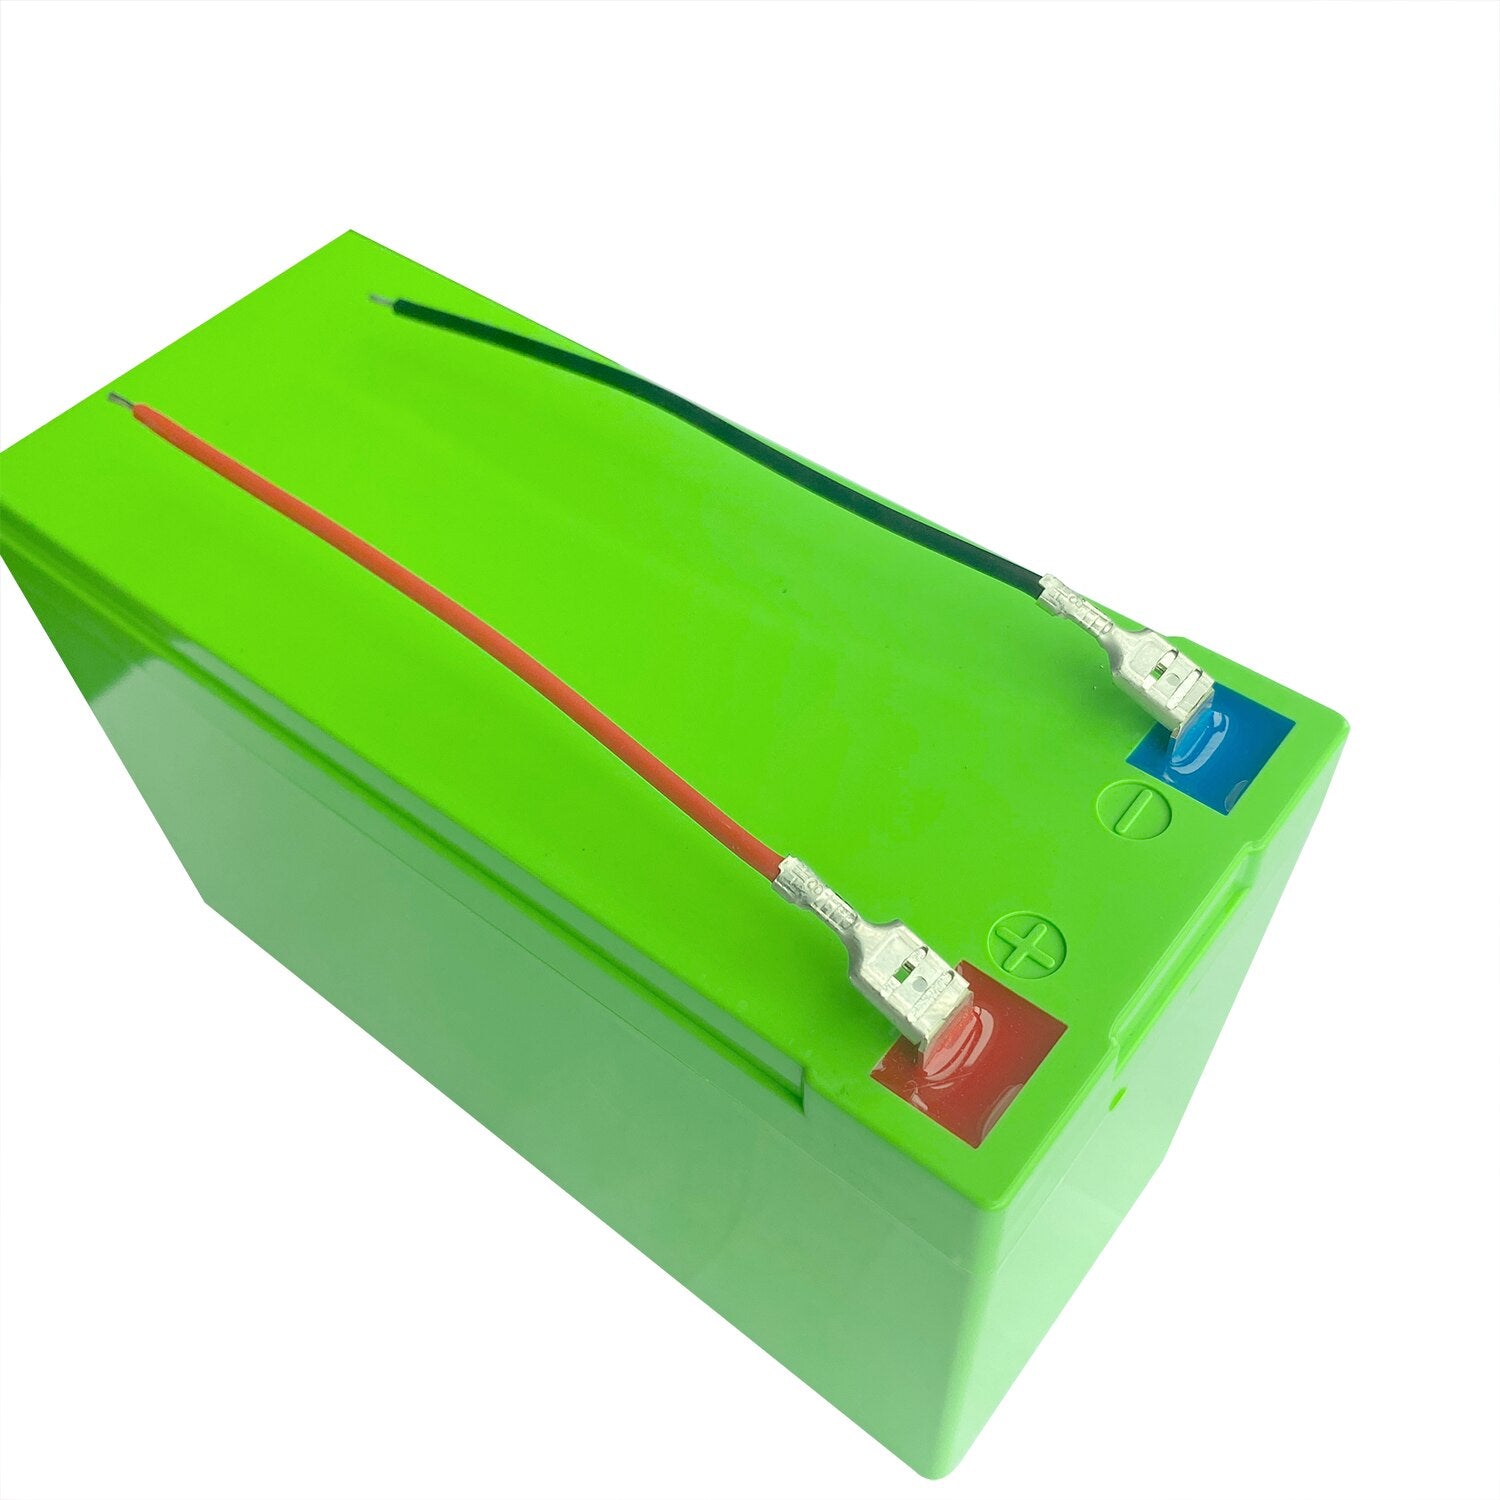 12v Battery 18650 Battery pack rechargeable lithium ion battery solar battery Electric toy car battery Storage battery with BMS